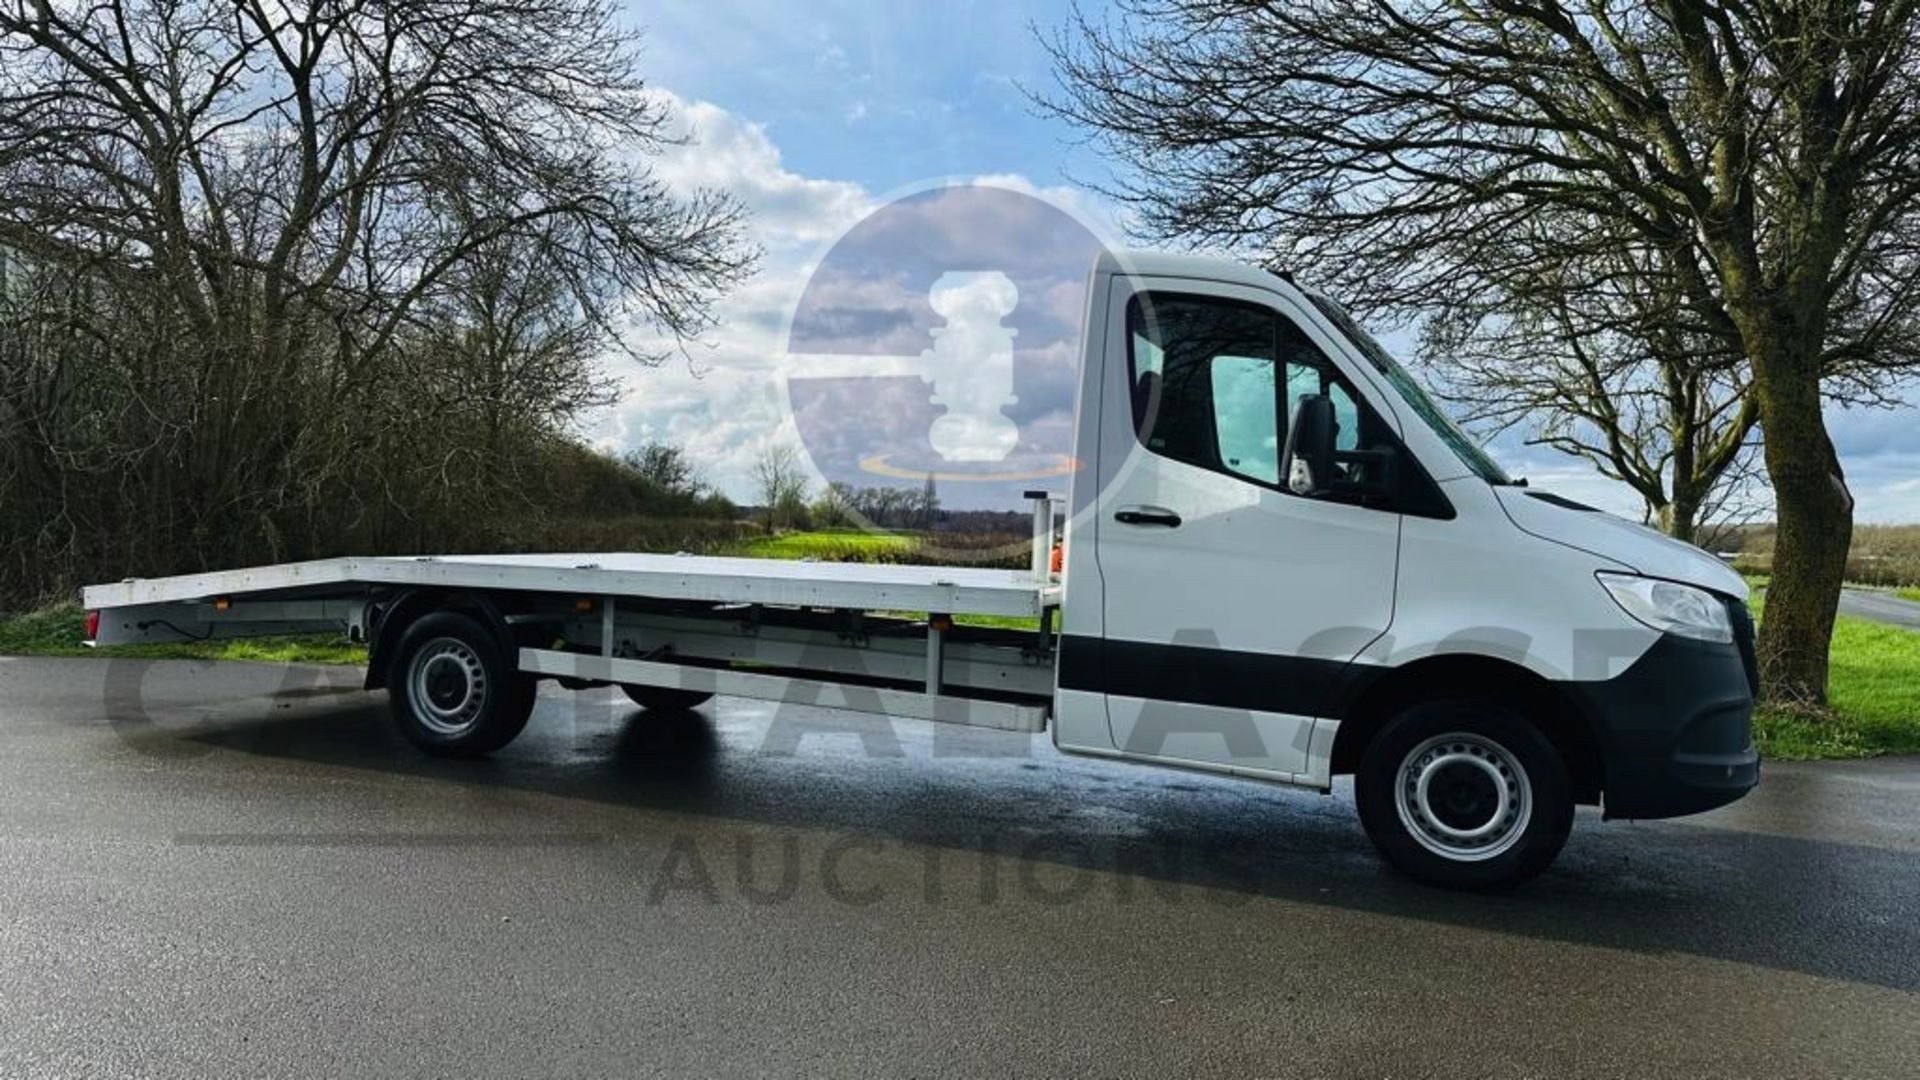 MERCEDES SPRINTER 314CDI "LWB RECOVERY TRUCK" 2019 MODEL - 1 OWNER - NEW BODY FITTED WITH ELEC WINCH